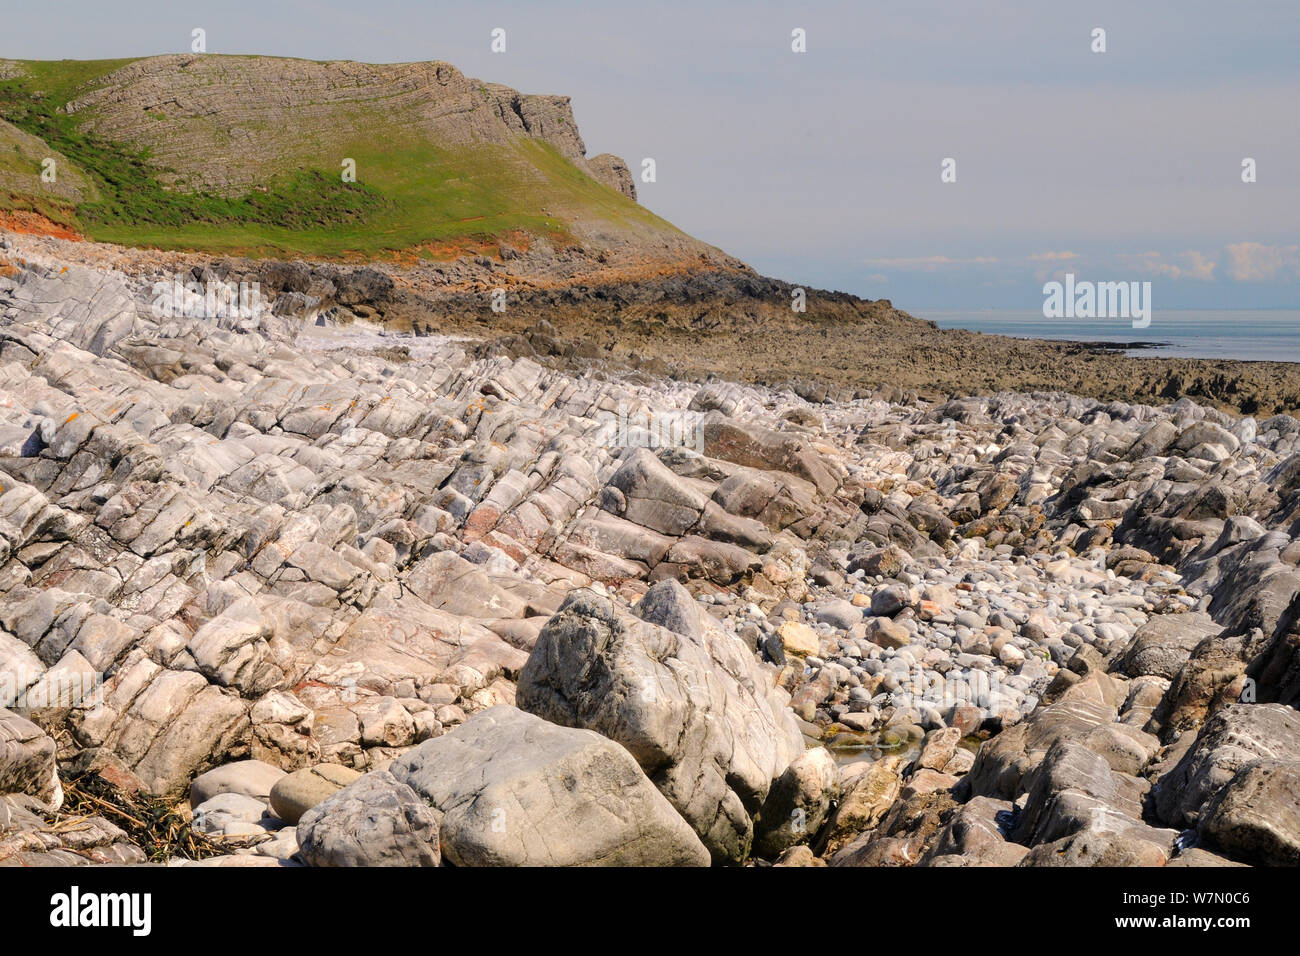 Limestone rocks, boulders and rockpool exposed at low tide with steep eroded cliffs above, near Rhossili, The Gower peninsula, Wales, UK, July. Sequence 1 of 2, matching view with different tides Stock Photo